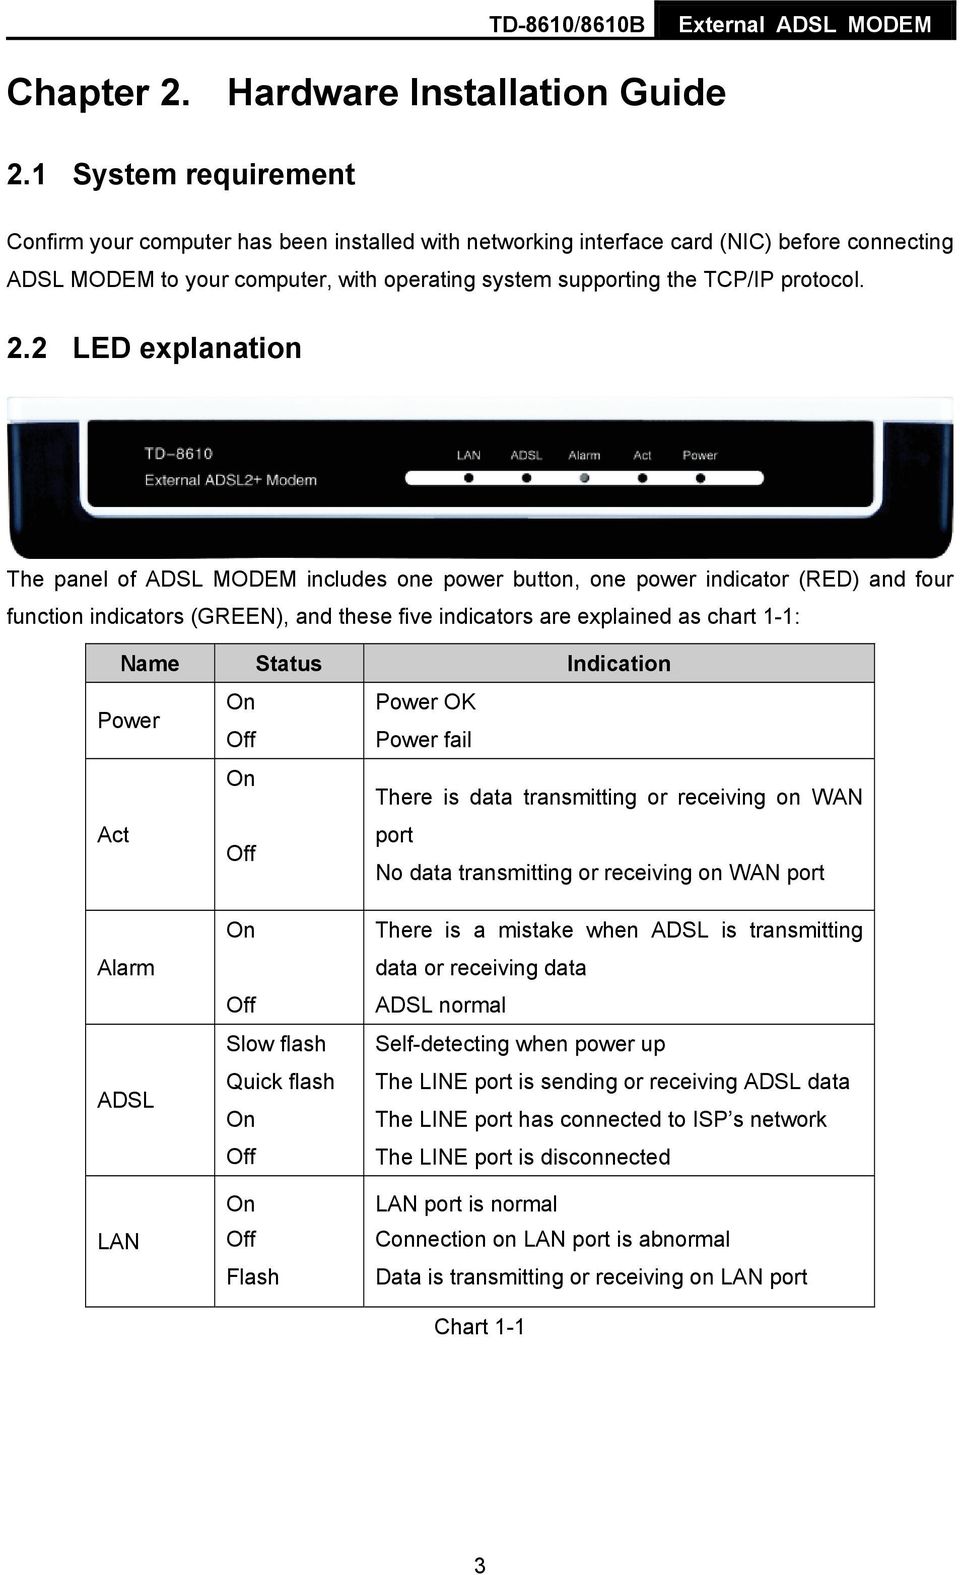 2.2 LED explanation The panel of ADSL MODEM includes one power button, one power indicator (RED) and four function indicators (GREEN), and these five indicators are explained as chart 1-1: Name